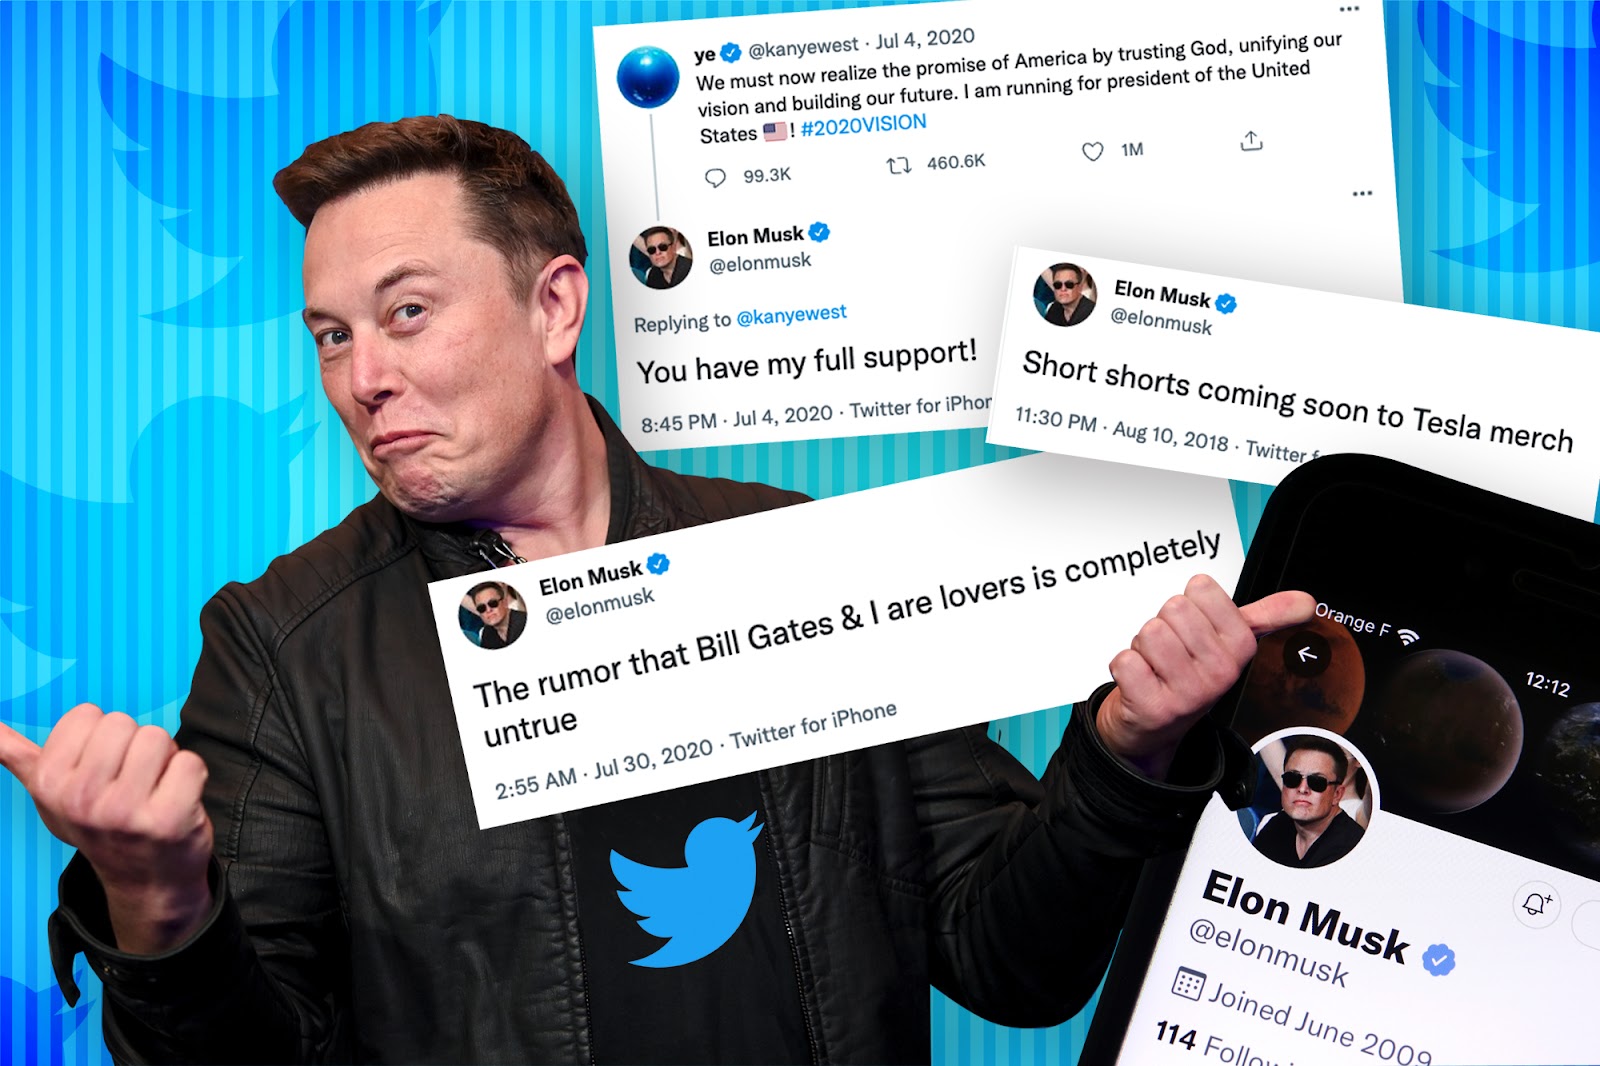 Elon musk quirkily posing surrounded by his funny tweets that include 'the rumor that Bill Gates & I are lovers is completely untrue'.